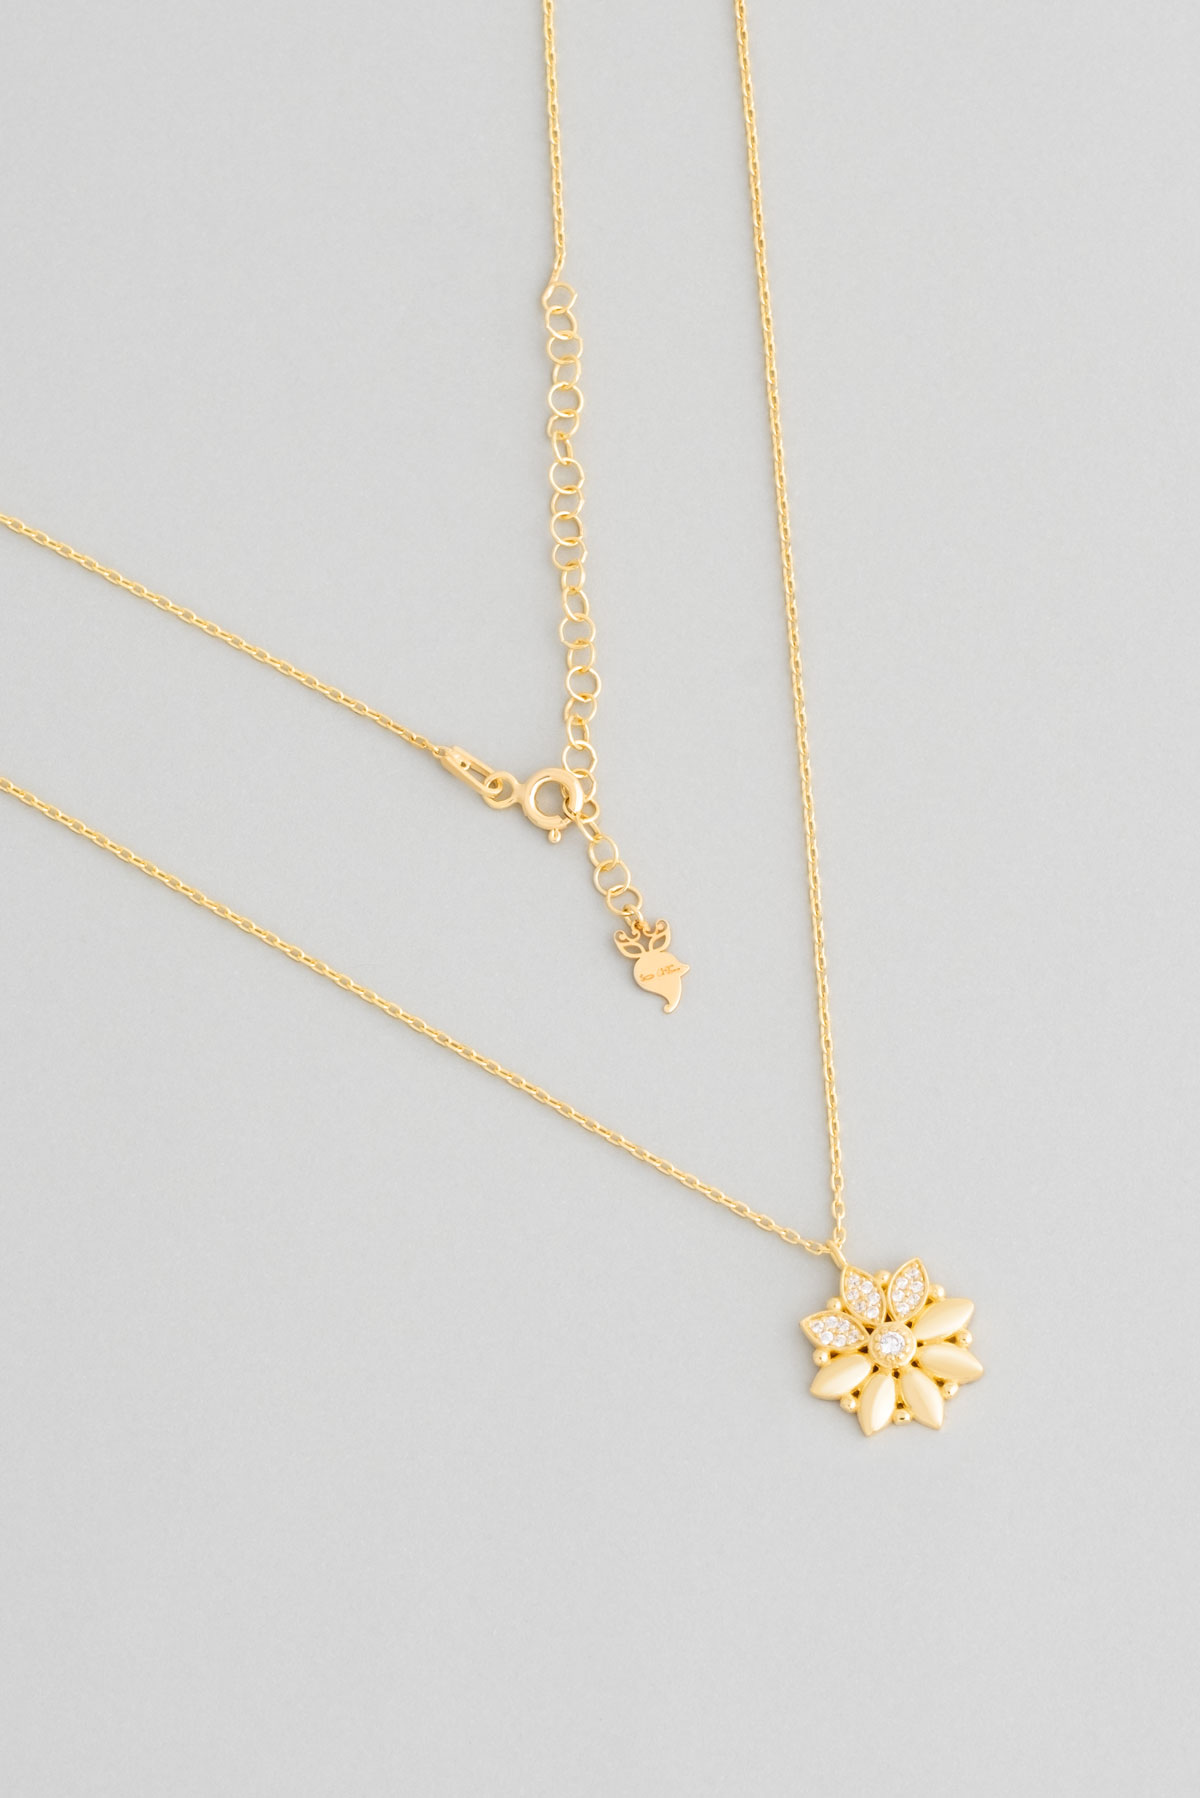  Azalea 18 Carat Yellow Gold Plated Silver Necklace